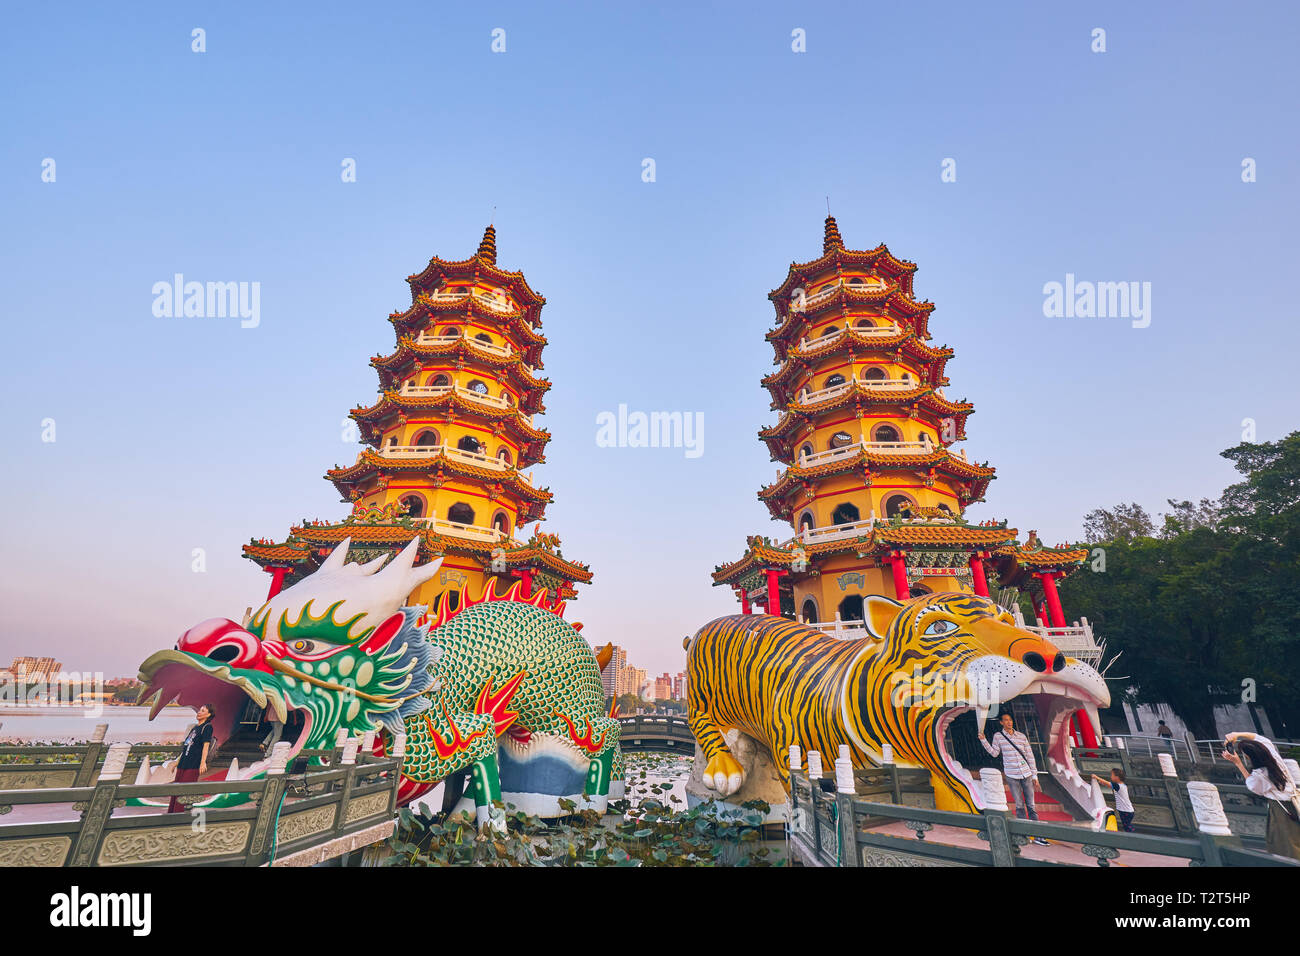 Kaohsiung, Taiwan - December 3, 2018: People come to merit at Cih Ji Dragon and Tiger Pagodas on lotus pond in sunset time at Zuoying district, Kaohsi Stock Photo